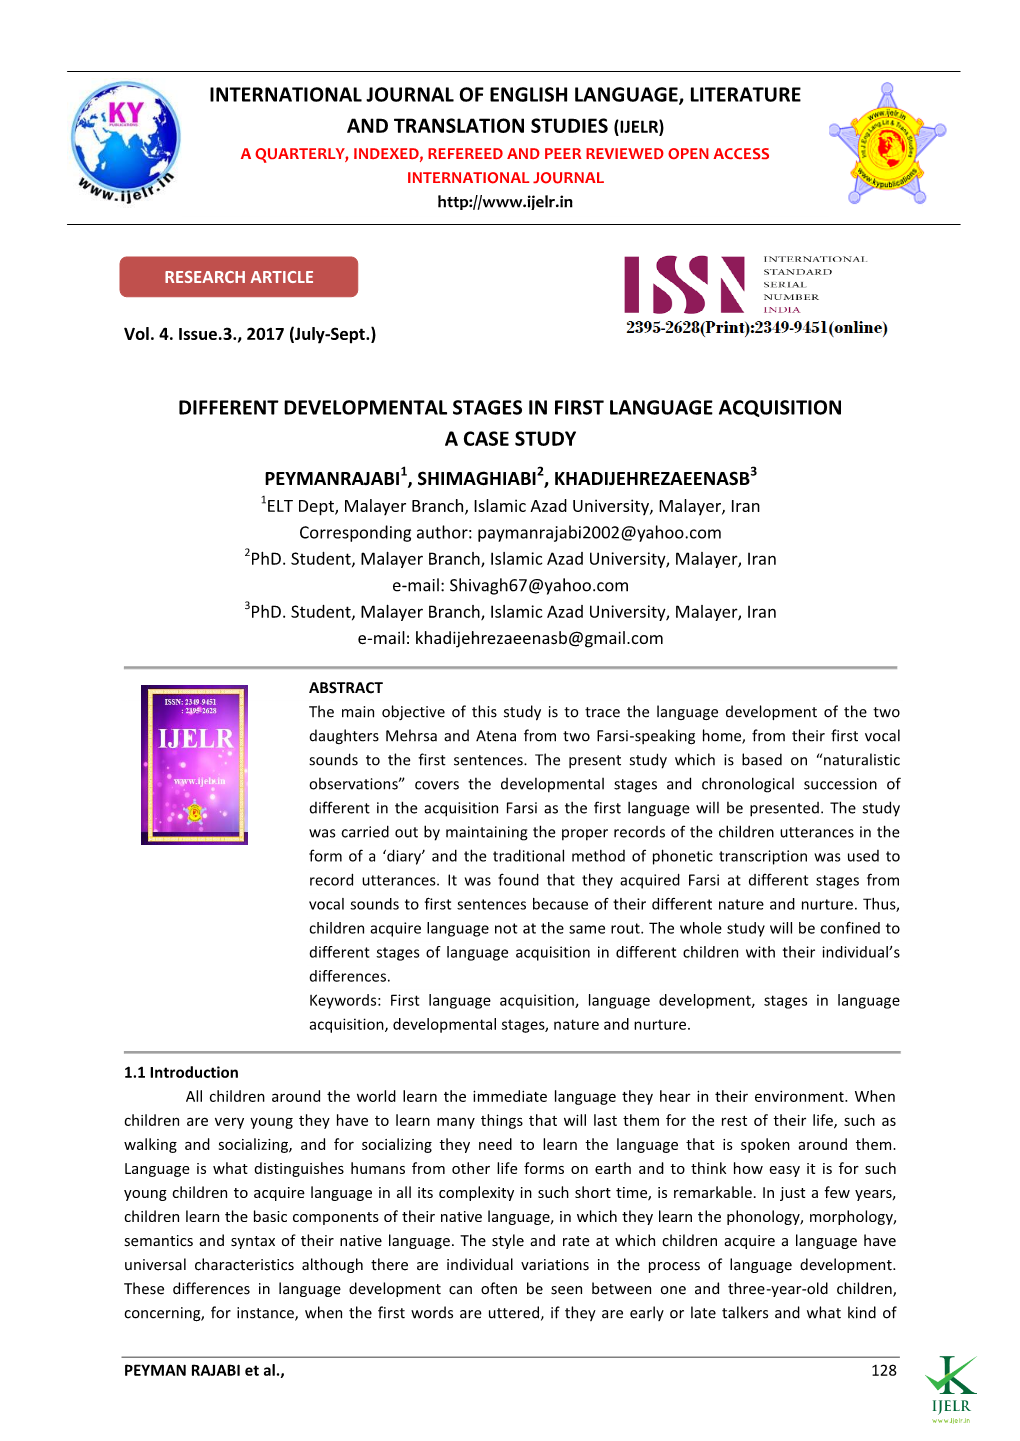 Different Developmental Stages in First Language Acquisition a Case Study